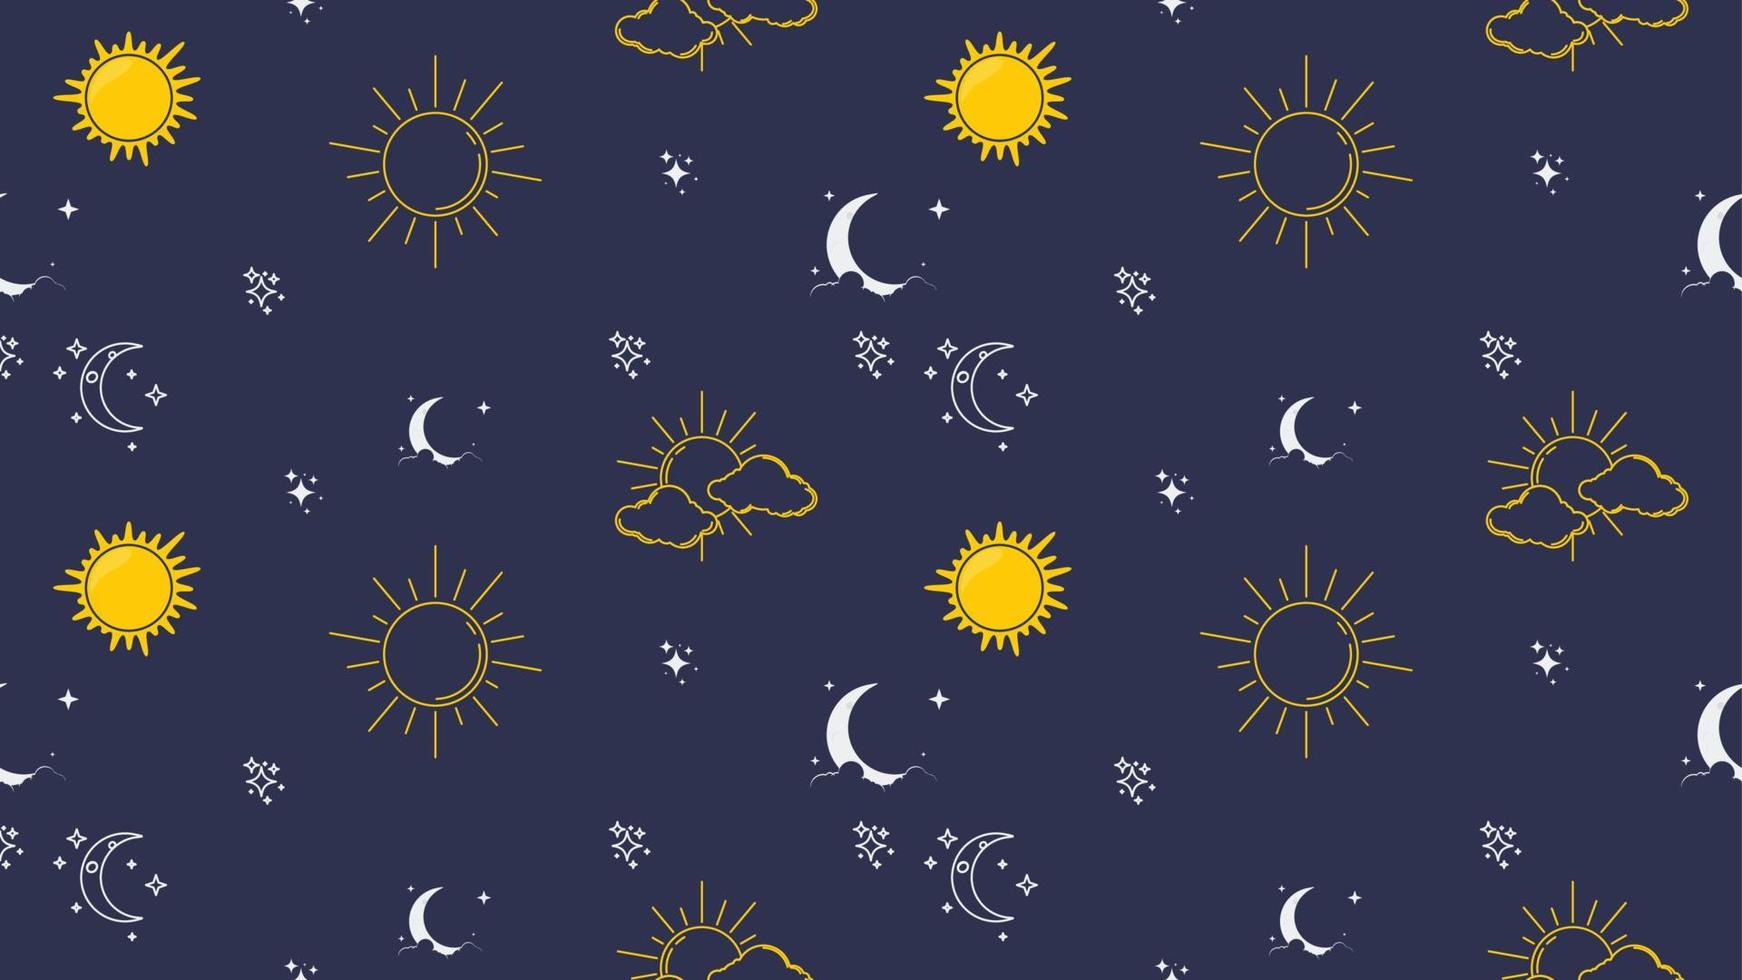 pattern suns, stars and moons icon vector illustration EPS10